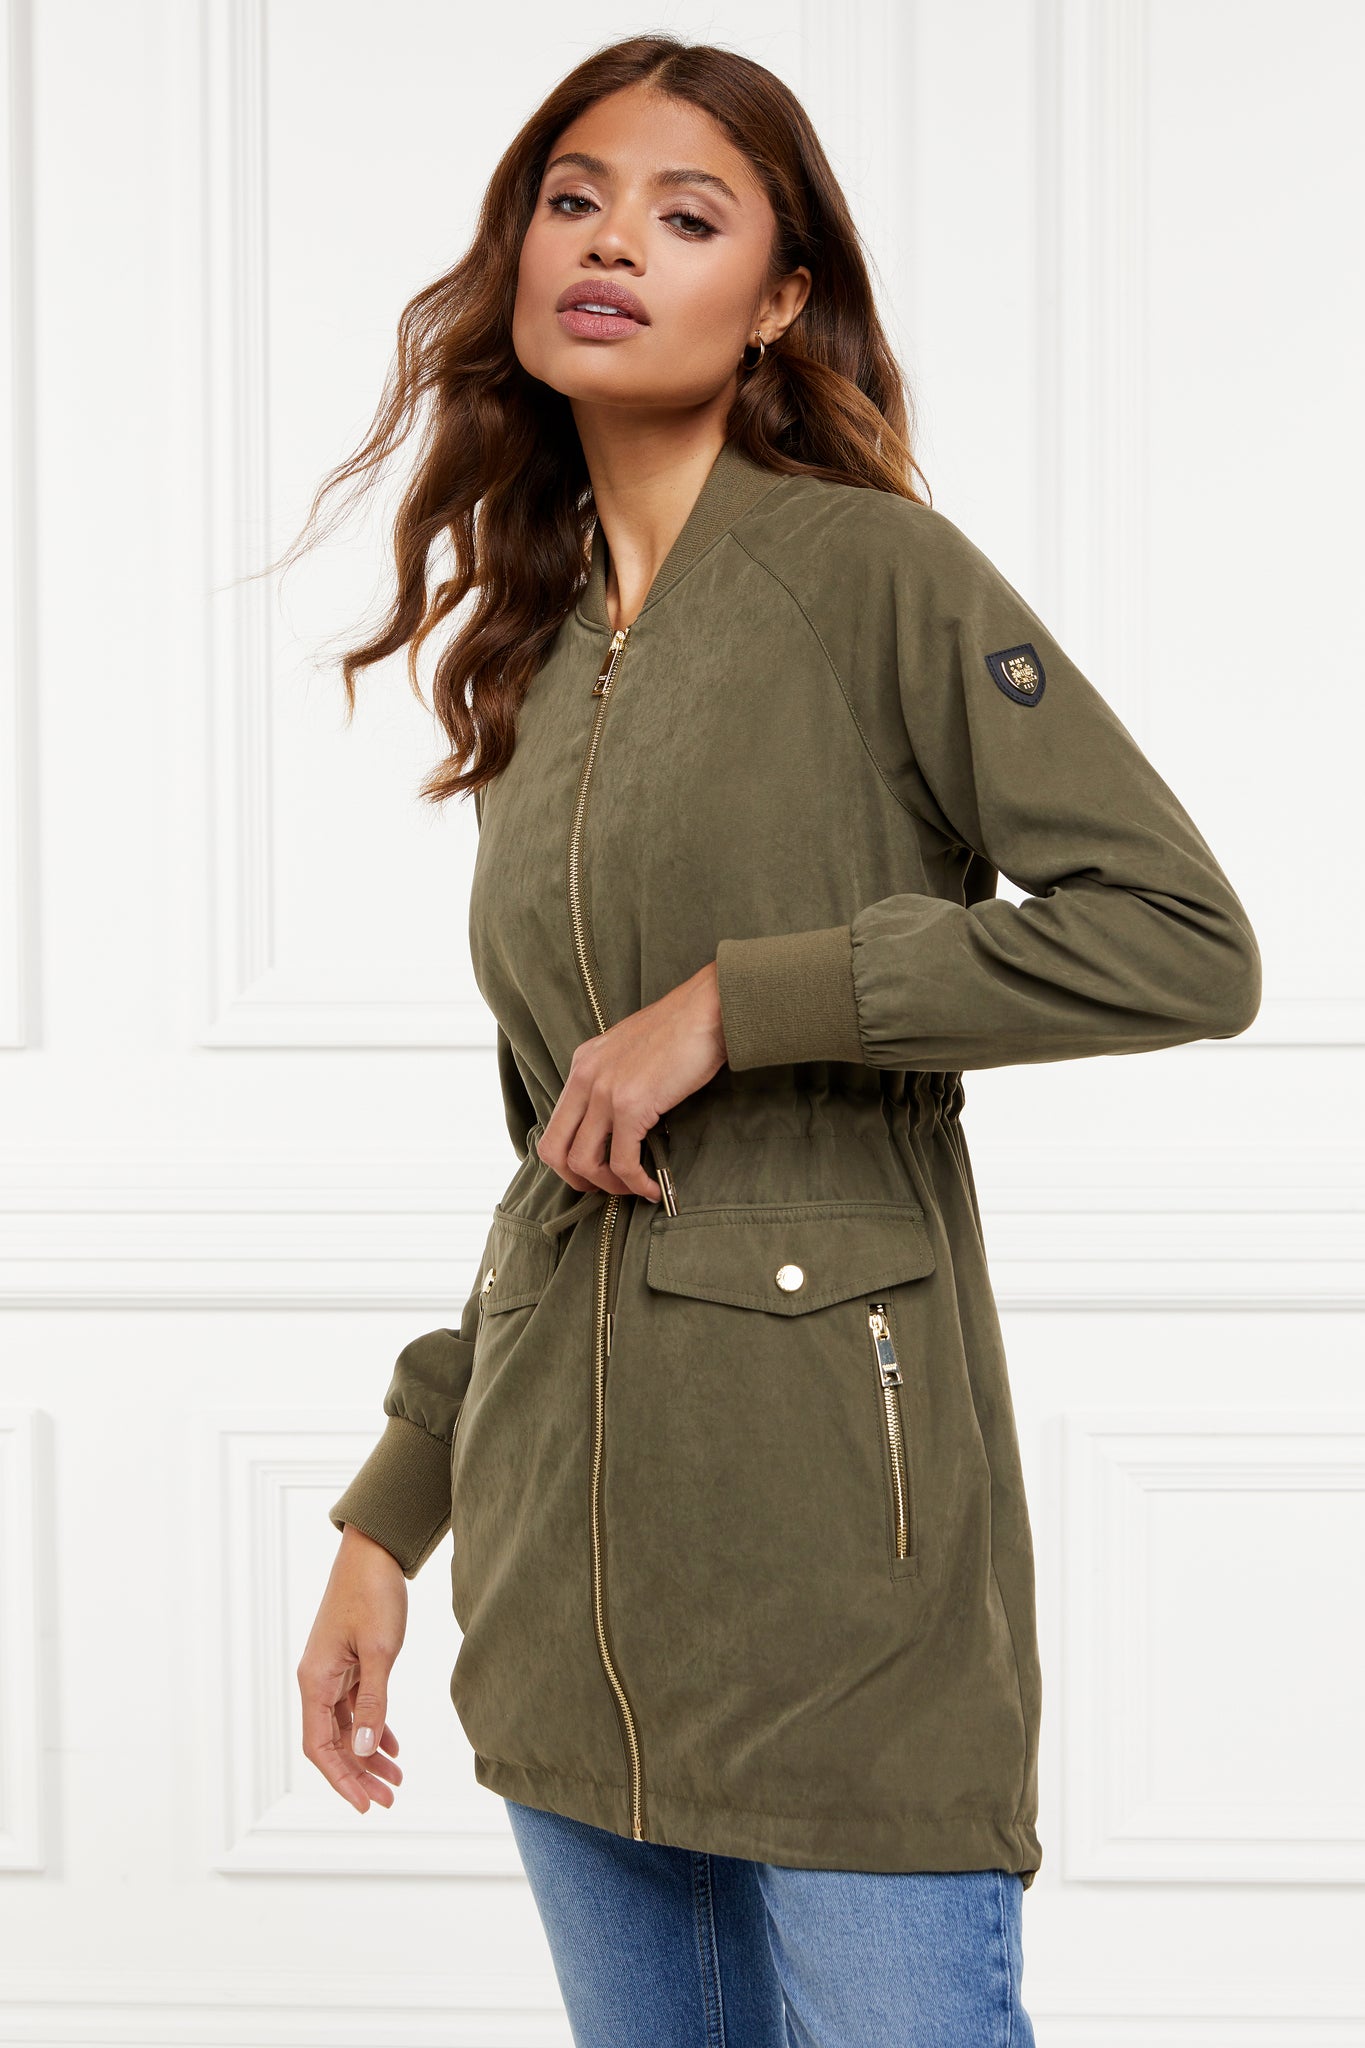 brushed suede longline lightweight parka jacket in khaki with an adjustable drawstring waist and fishtail hem and ribbed baseball style jersey collar and cuffs finished with gold hardware and gold shield on sleeve